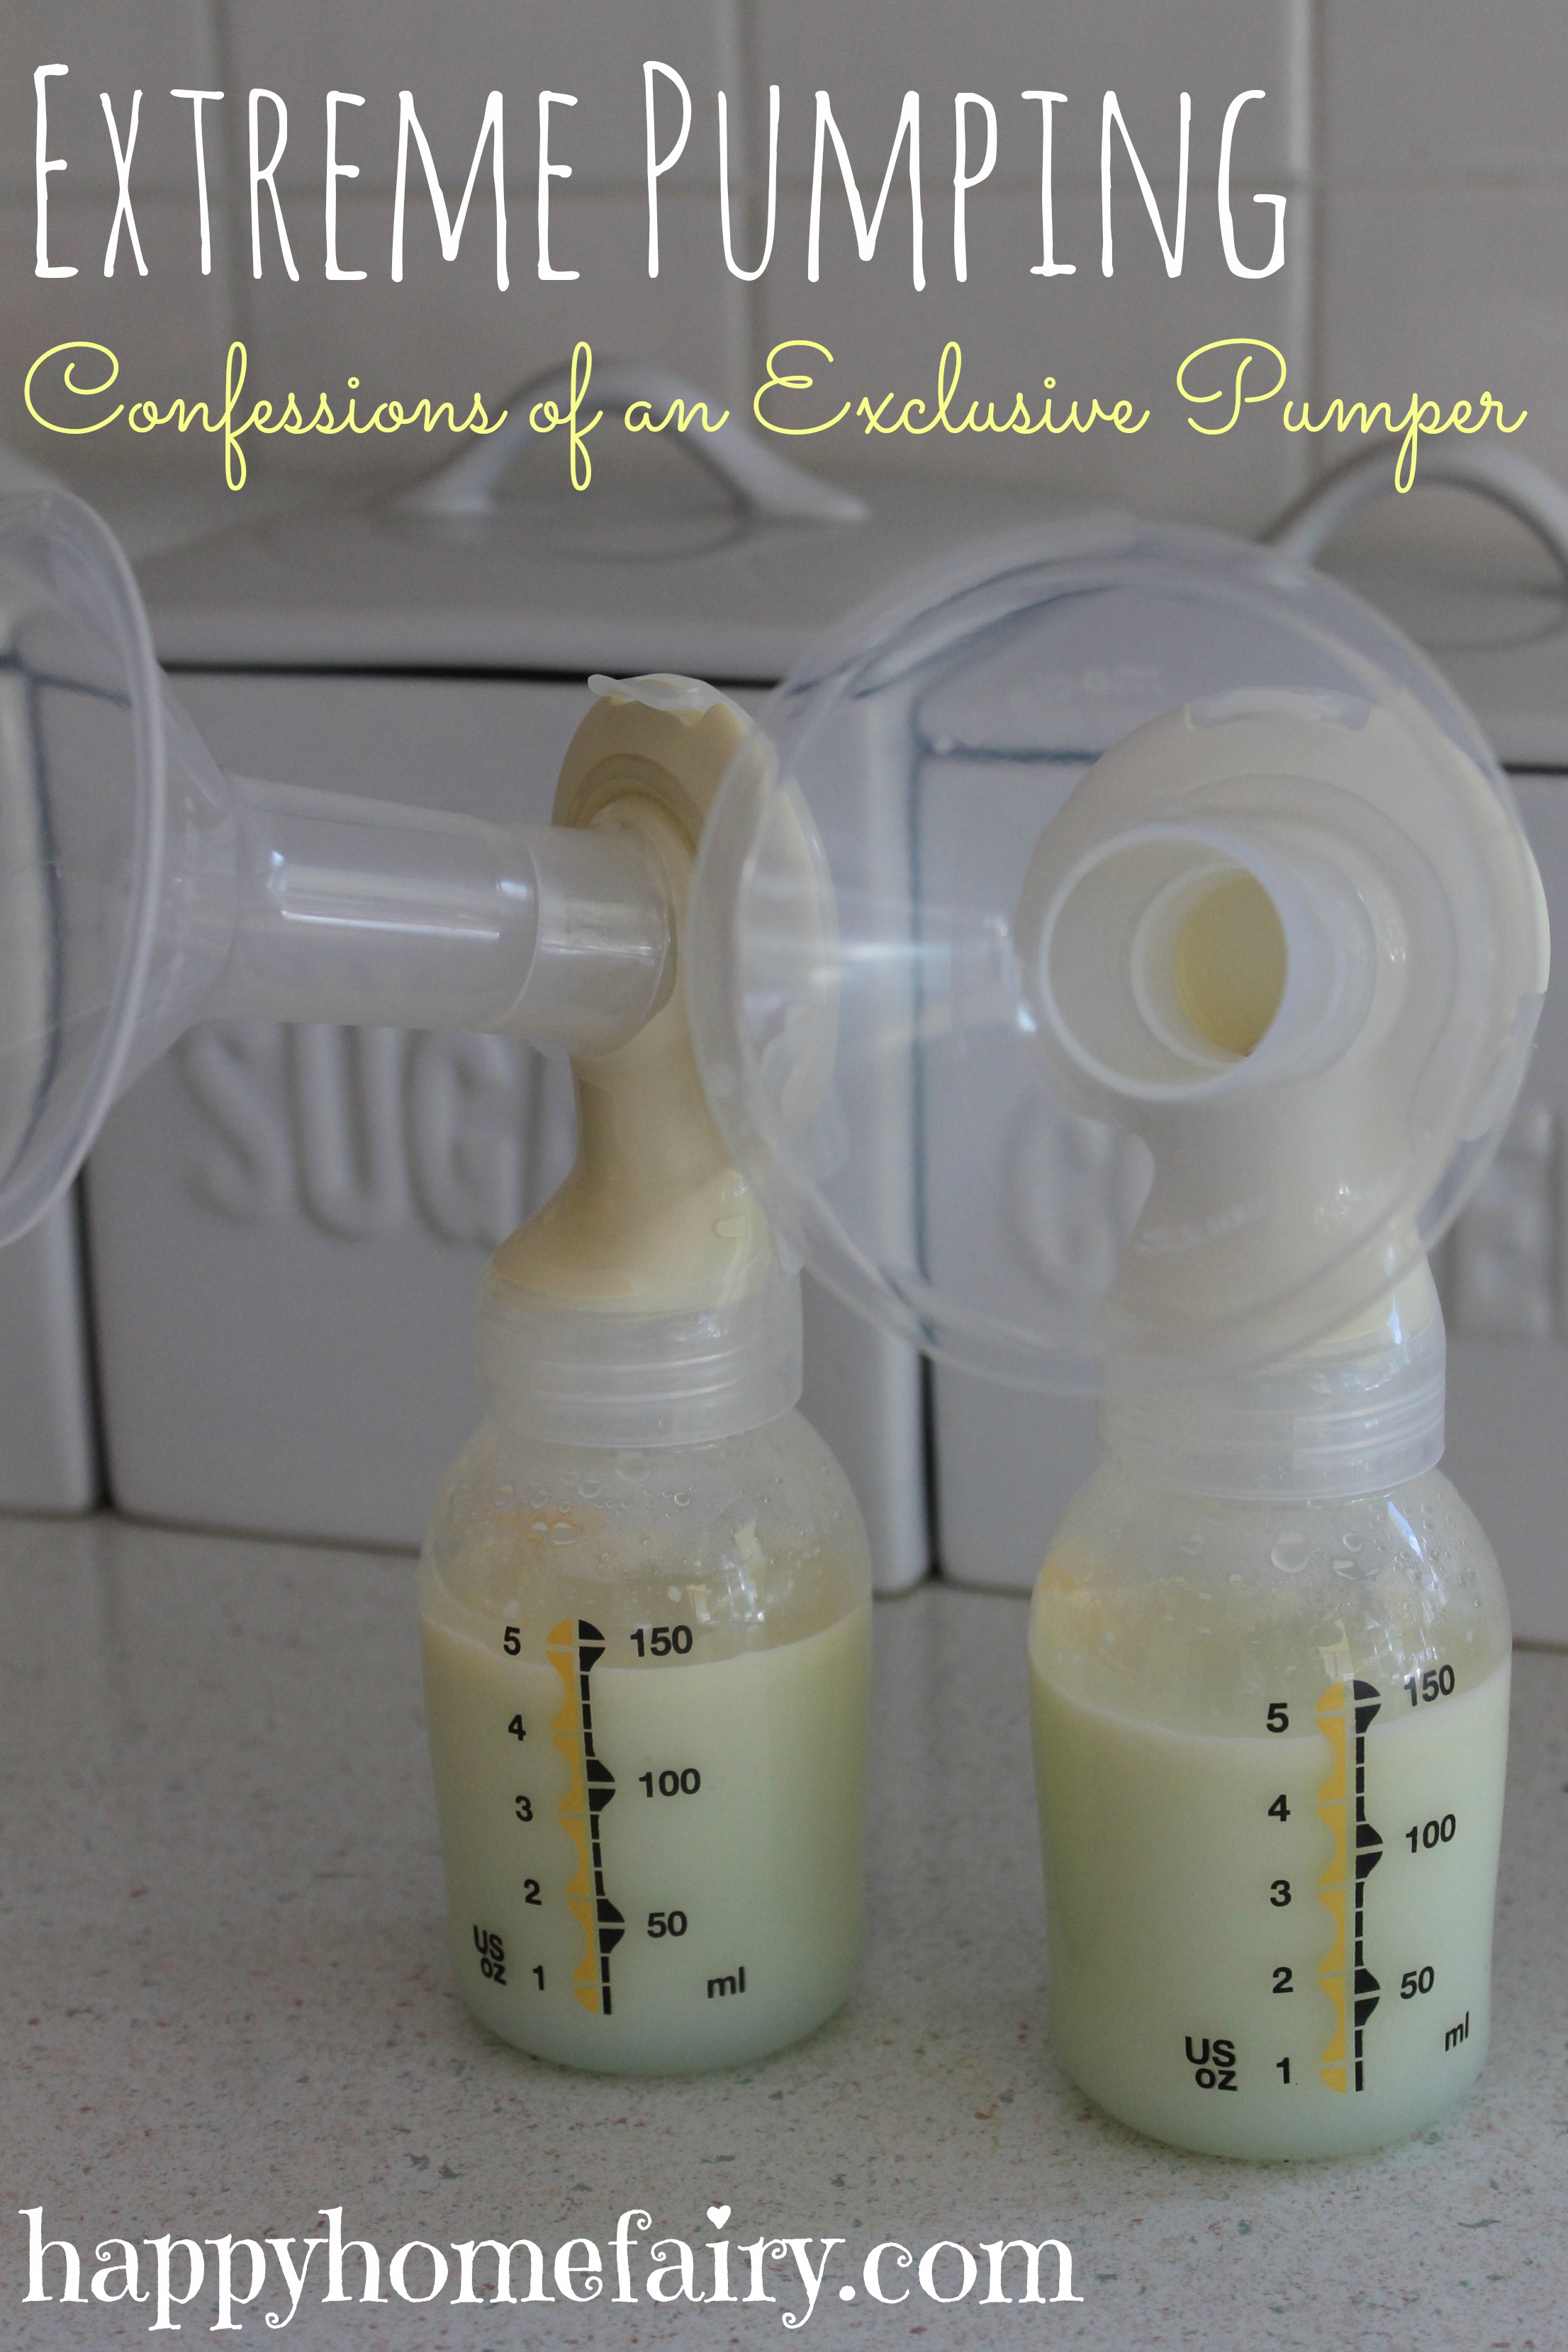 Exclusive Pumping Tips: Make it Easier - Postpartum Together